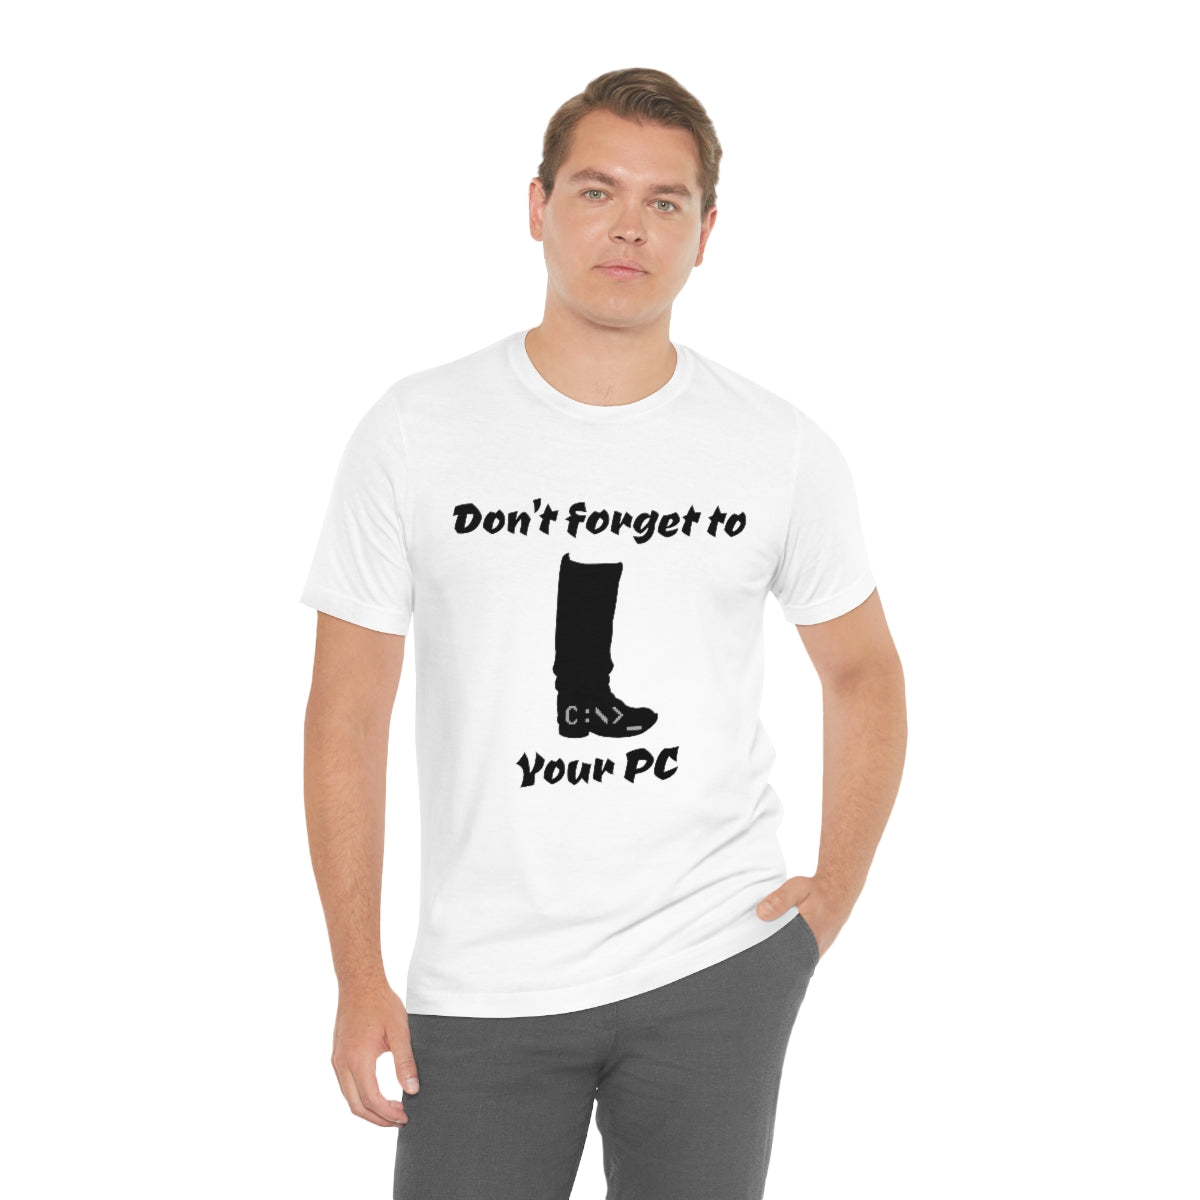 Don't forget to BOOT your PC - Funny Tech - Unisex Short Sleeve Tee